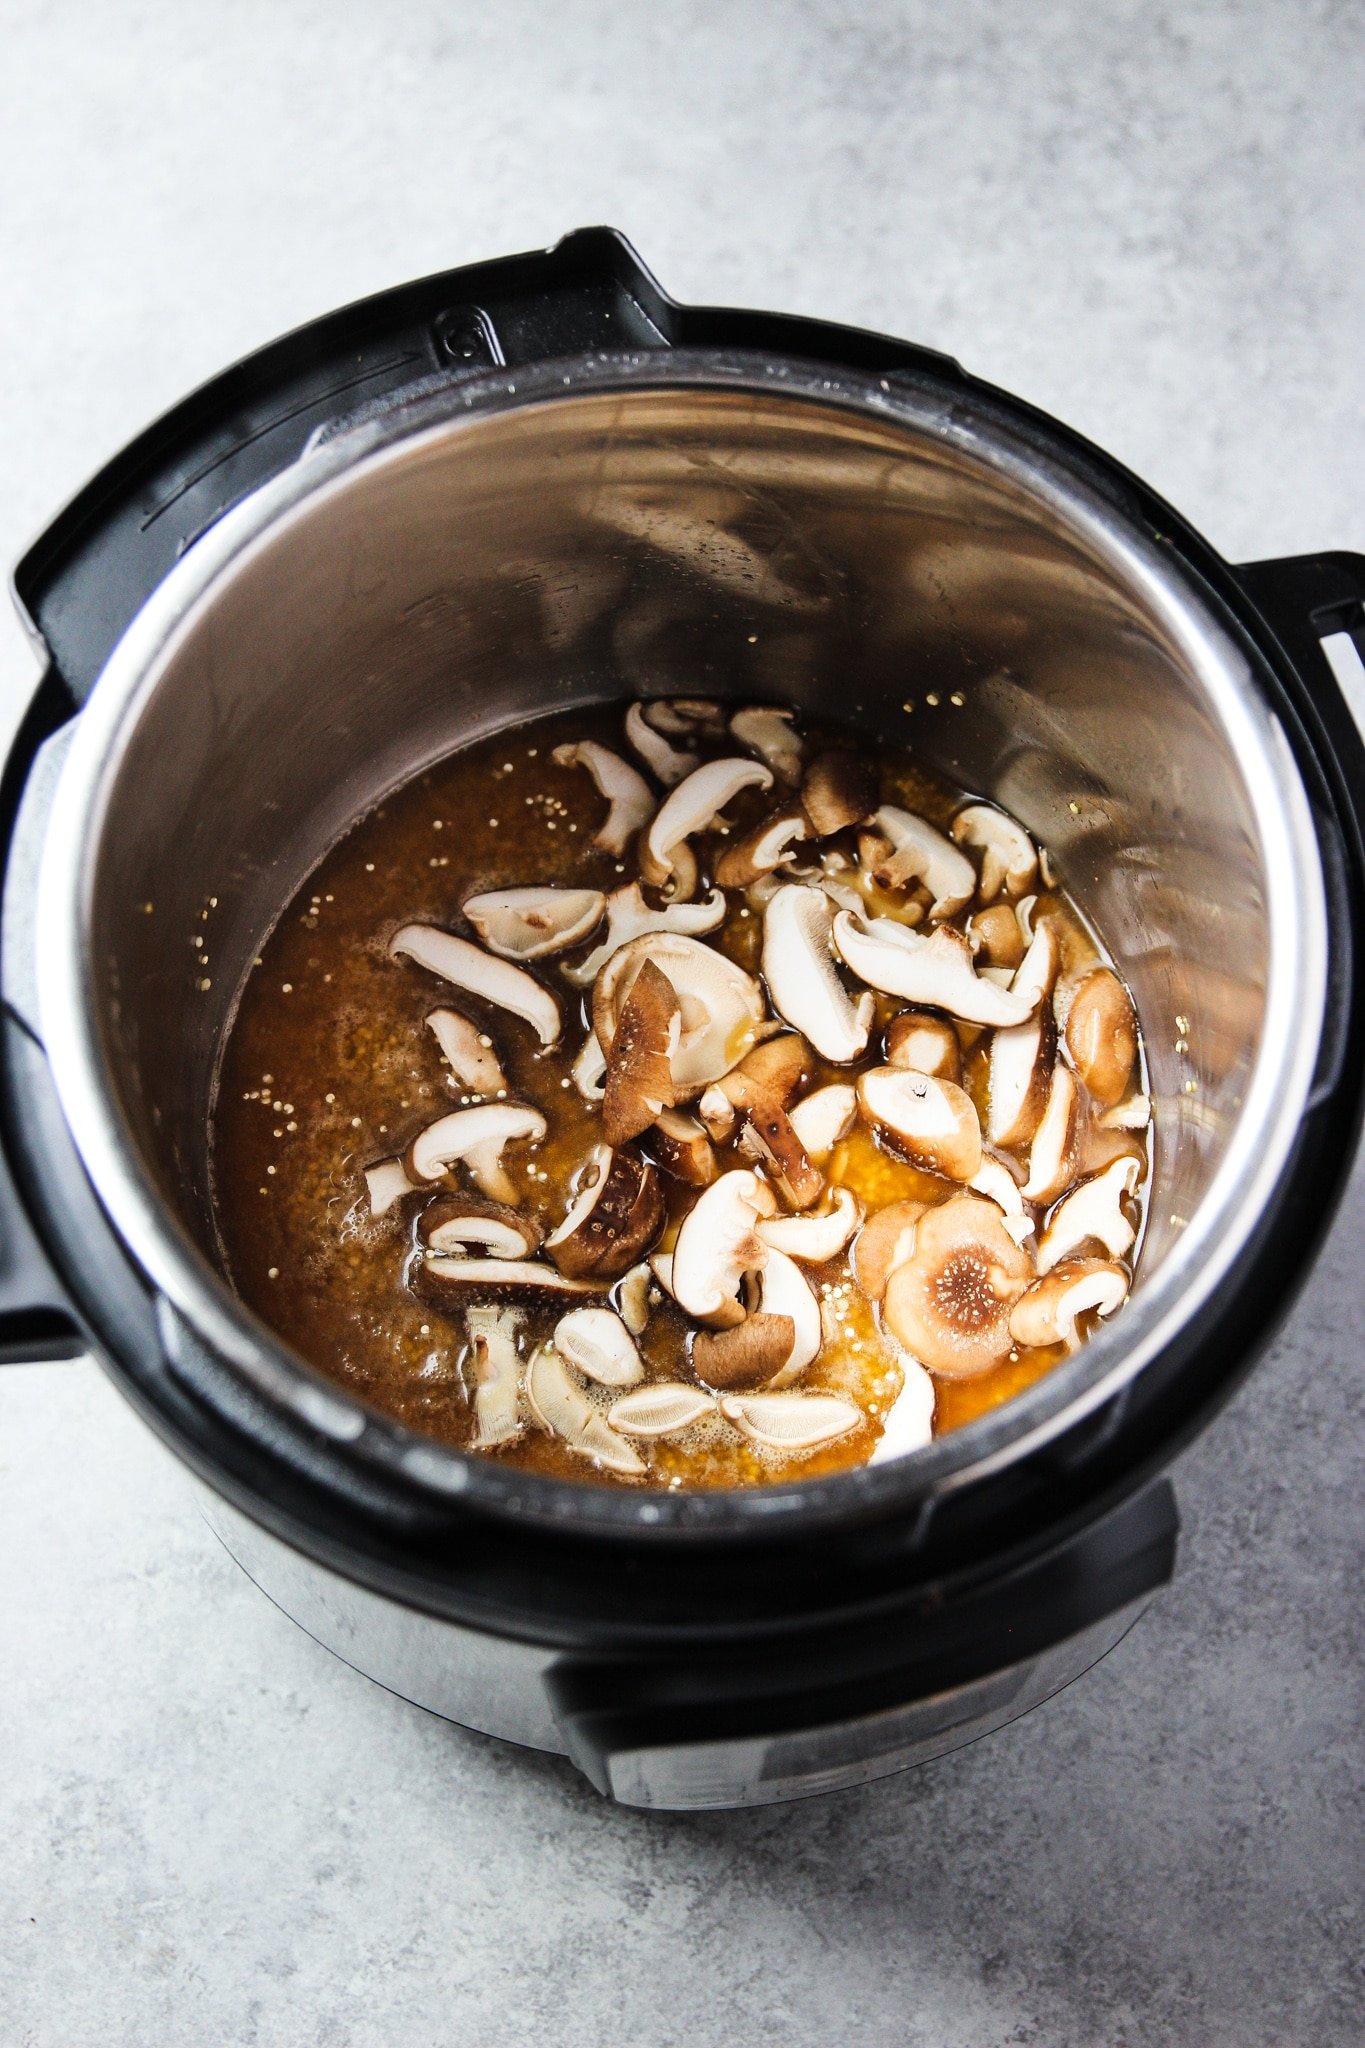 raw mushrooms and broth in the bowl of an instant pot.